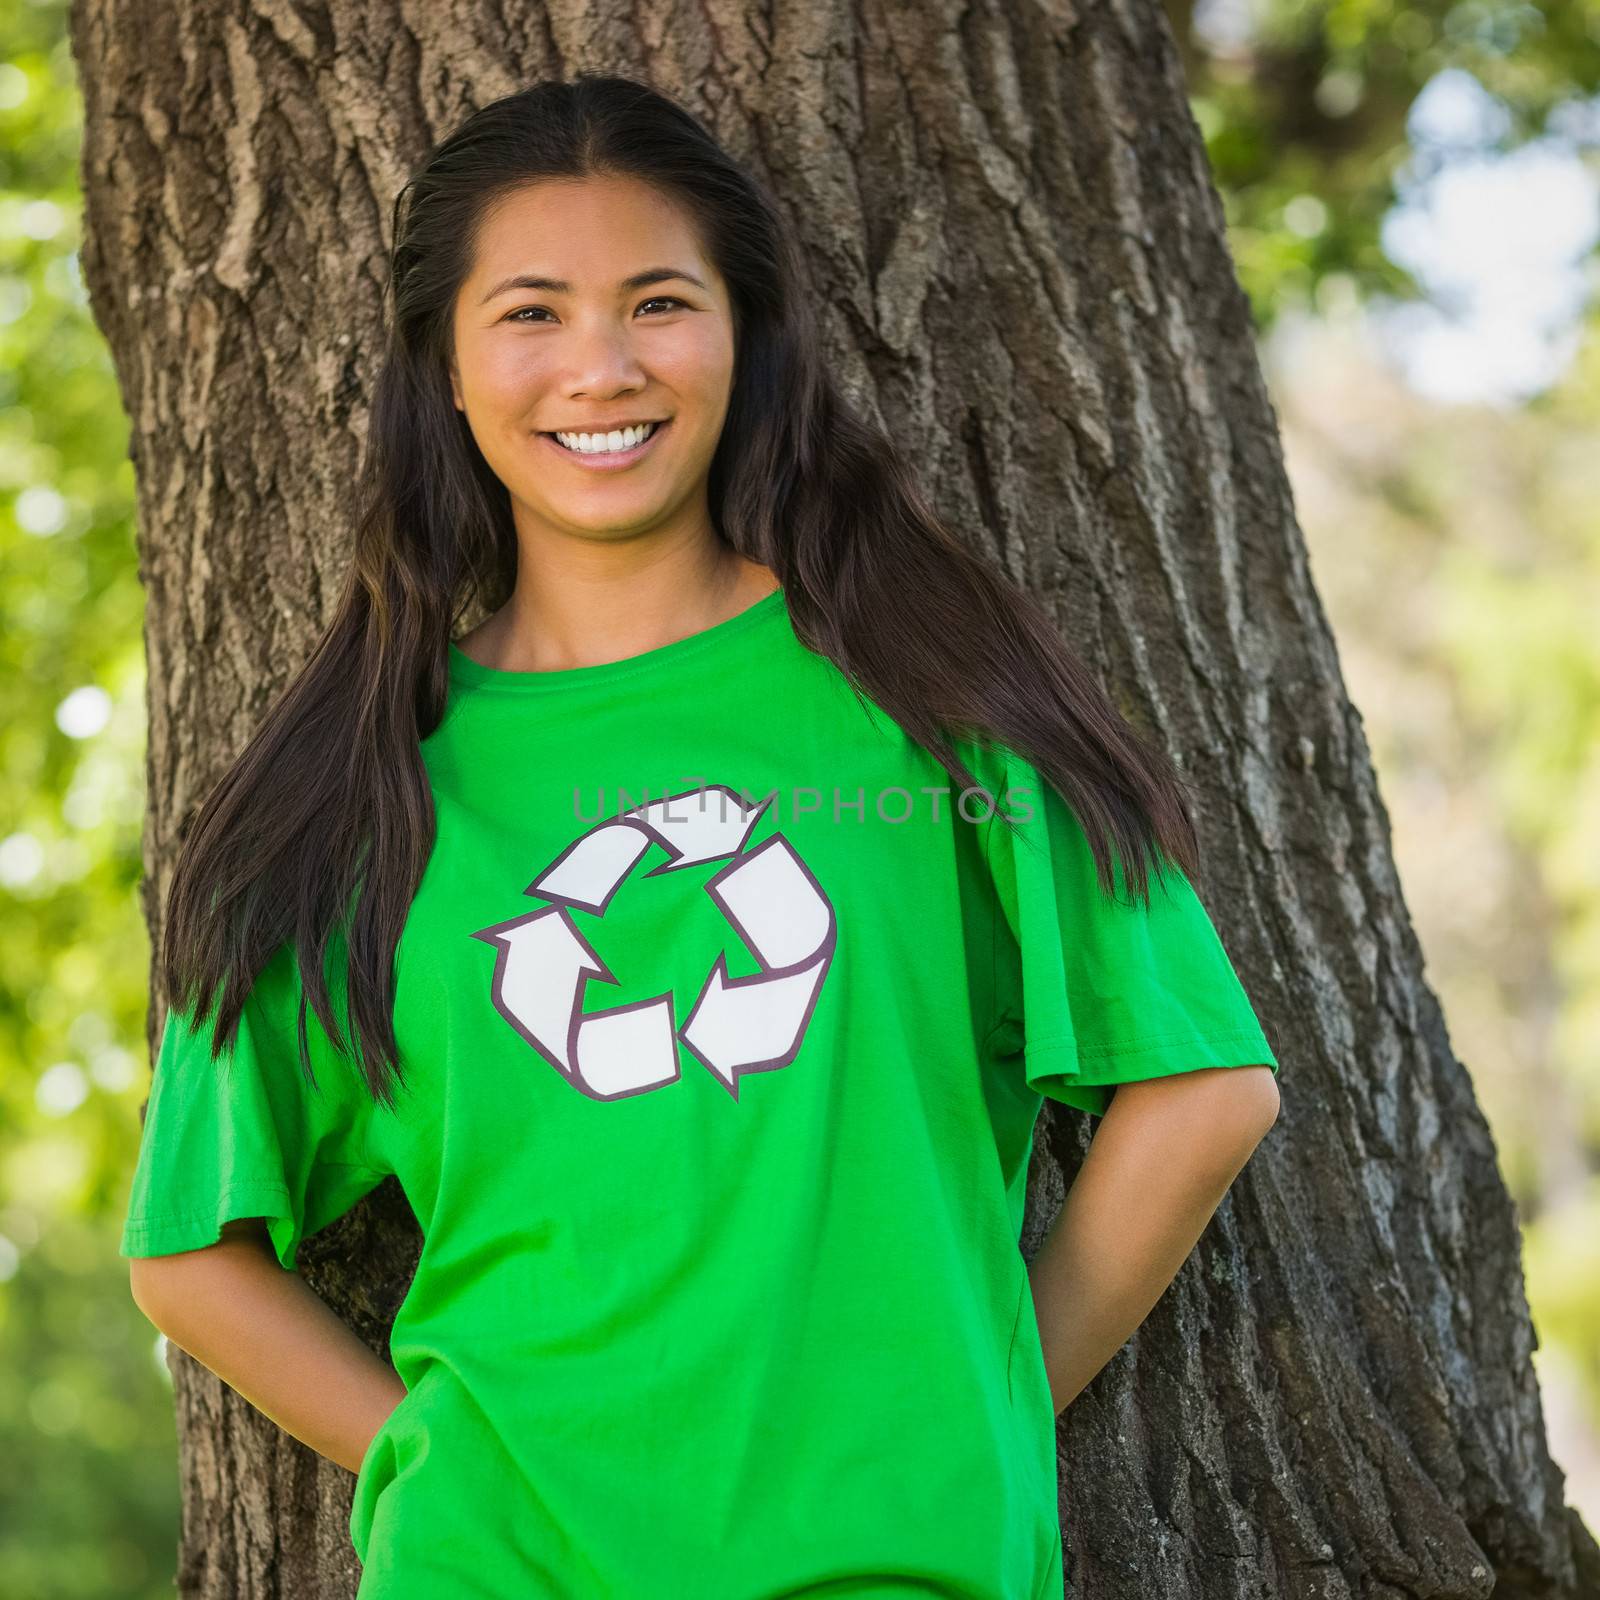 Smiling woman wearing green recycling t-shirt in park by Wavebreakmedia